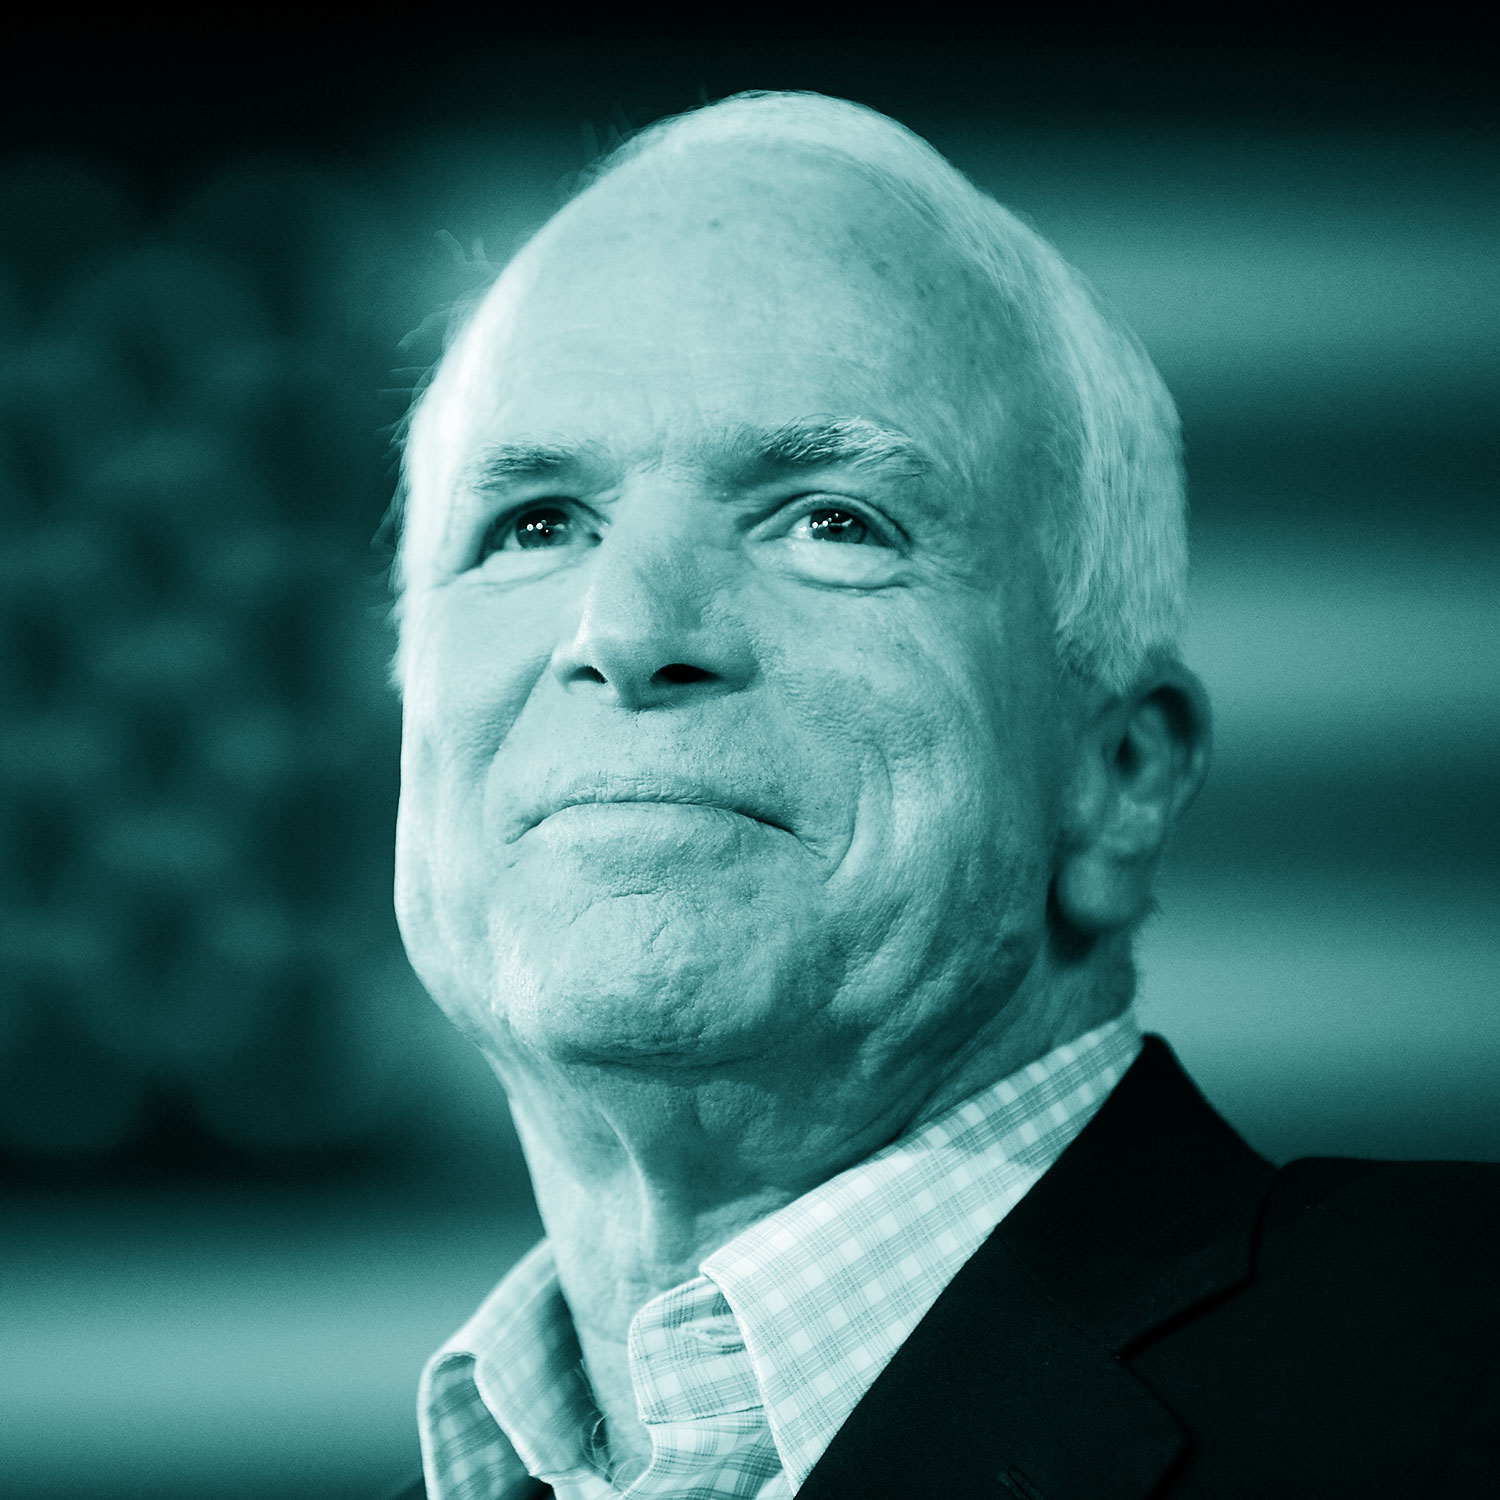 Being a maverick almost stopped John McCain from becoming a public servant